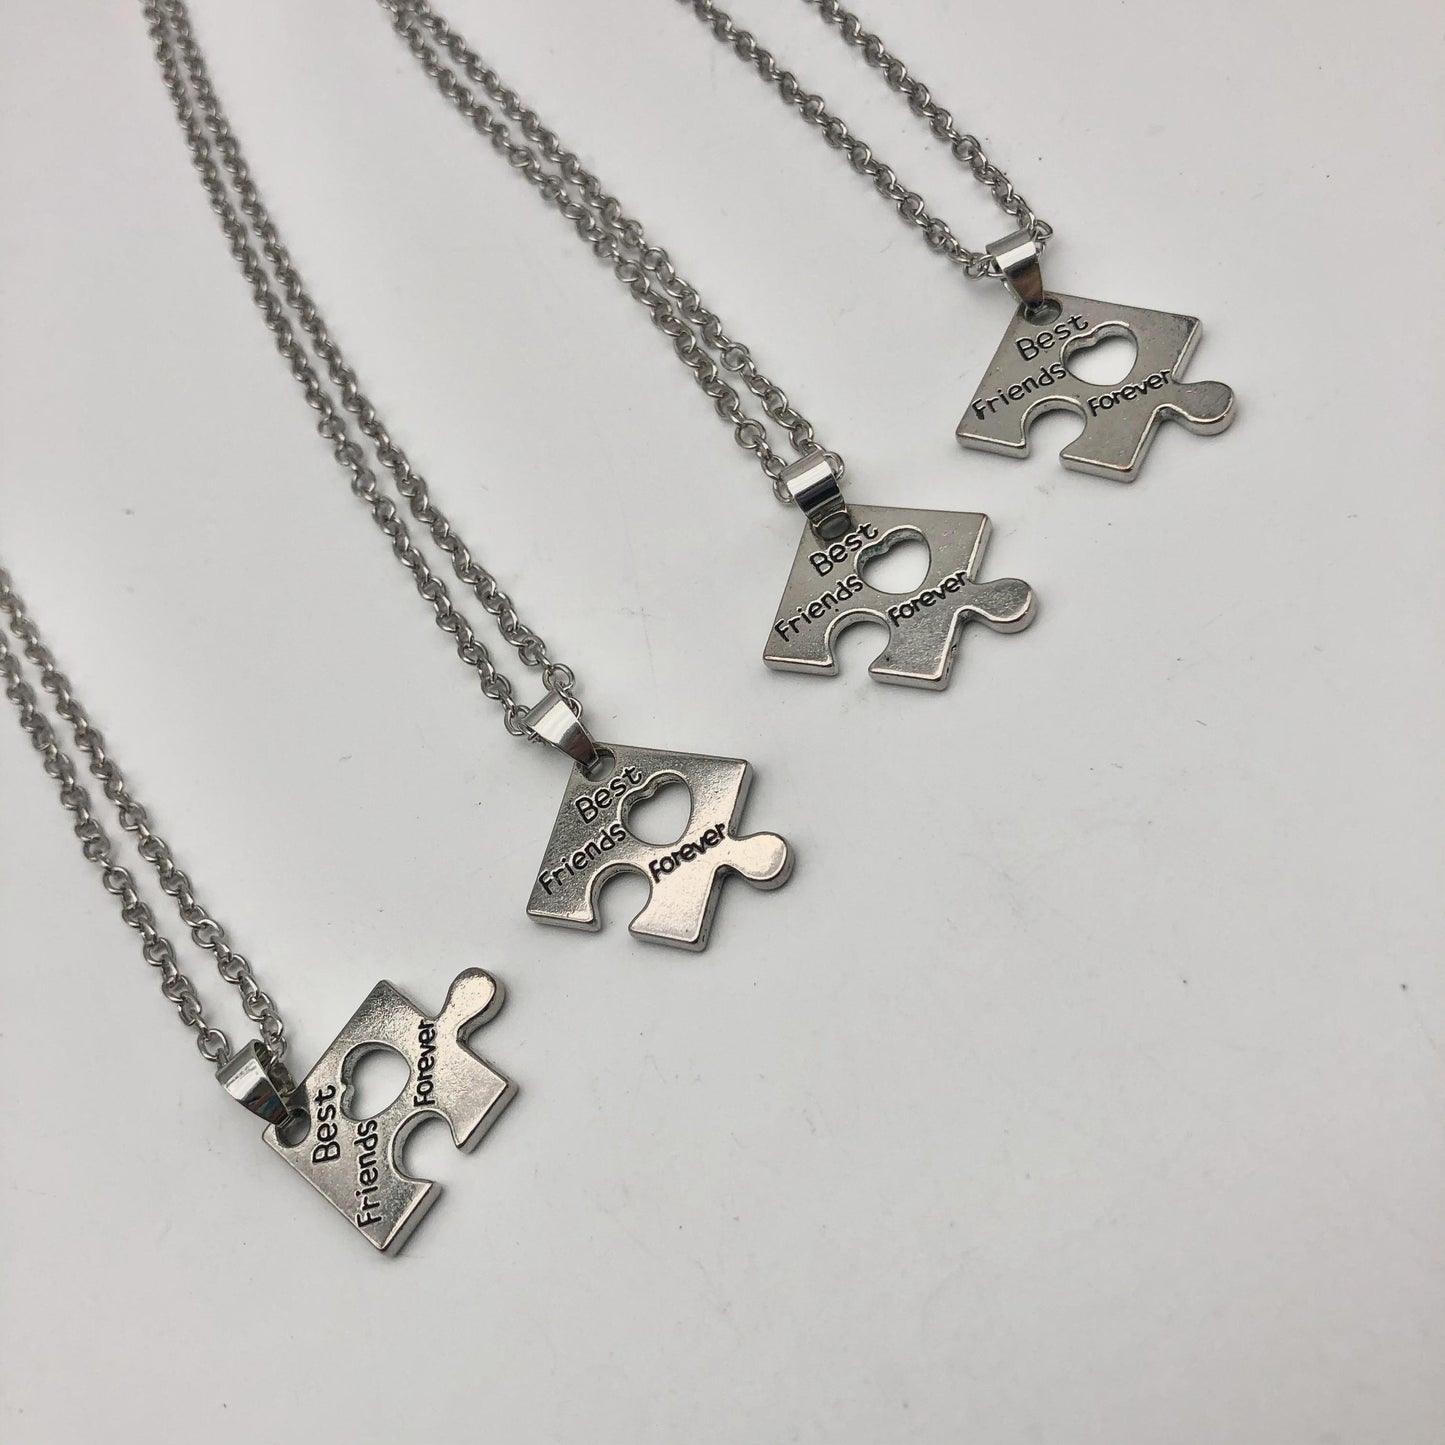 4 Best Friends Necklace 4BFF - BFF-GIFTS